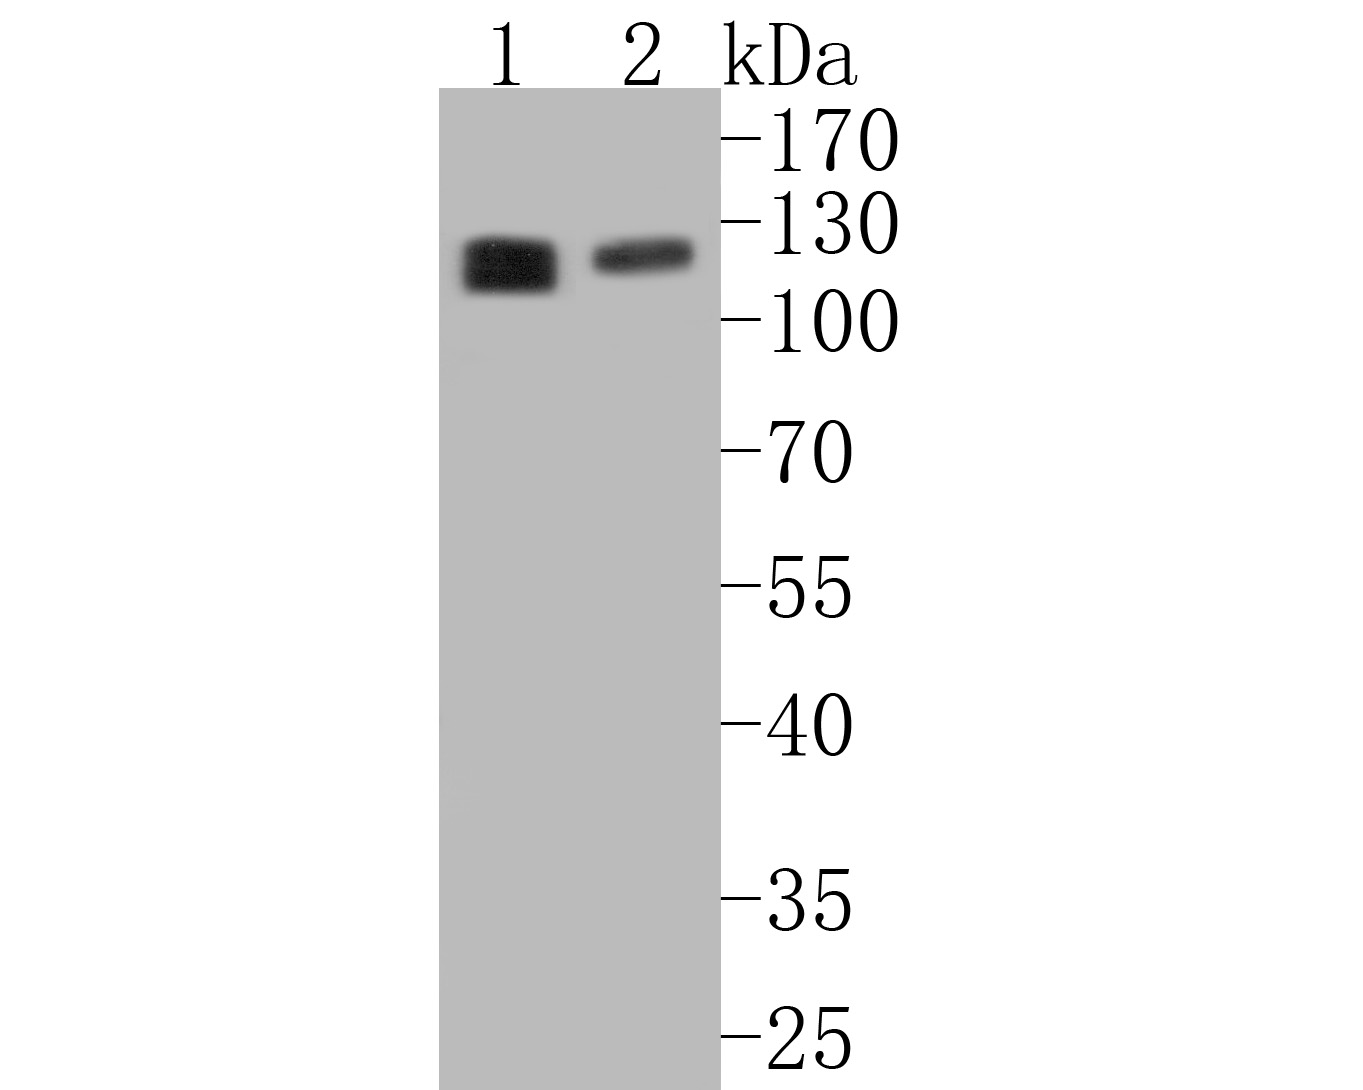 Western blot analysis of eIF3B on different lysates. Proteins were transferred to a PVDF membrane and blocked with 5% BSA in PBS for 1 hour at room temperature. The primary antibody (ET7110-36, 1/500) was used in 5% BSA at room temperature for 2 hours. Goat Anti-Rabbit IgG - HRP Secondary Antibody (HA1001) at 1:5,000 dilution was used for 1 hour at room temperature.<br />
Positive control: <br />
Lane 1: A431 cell lysate<br />
Lane 2: 293T cell lysate